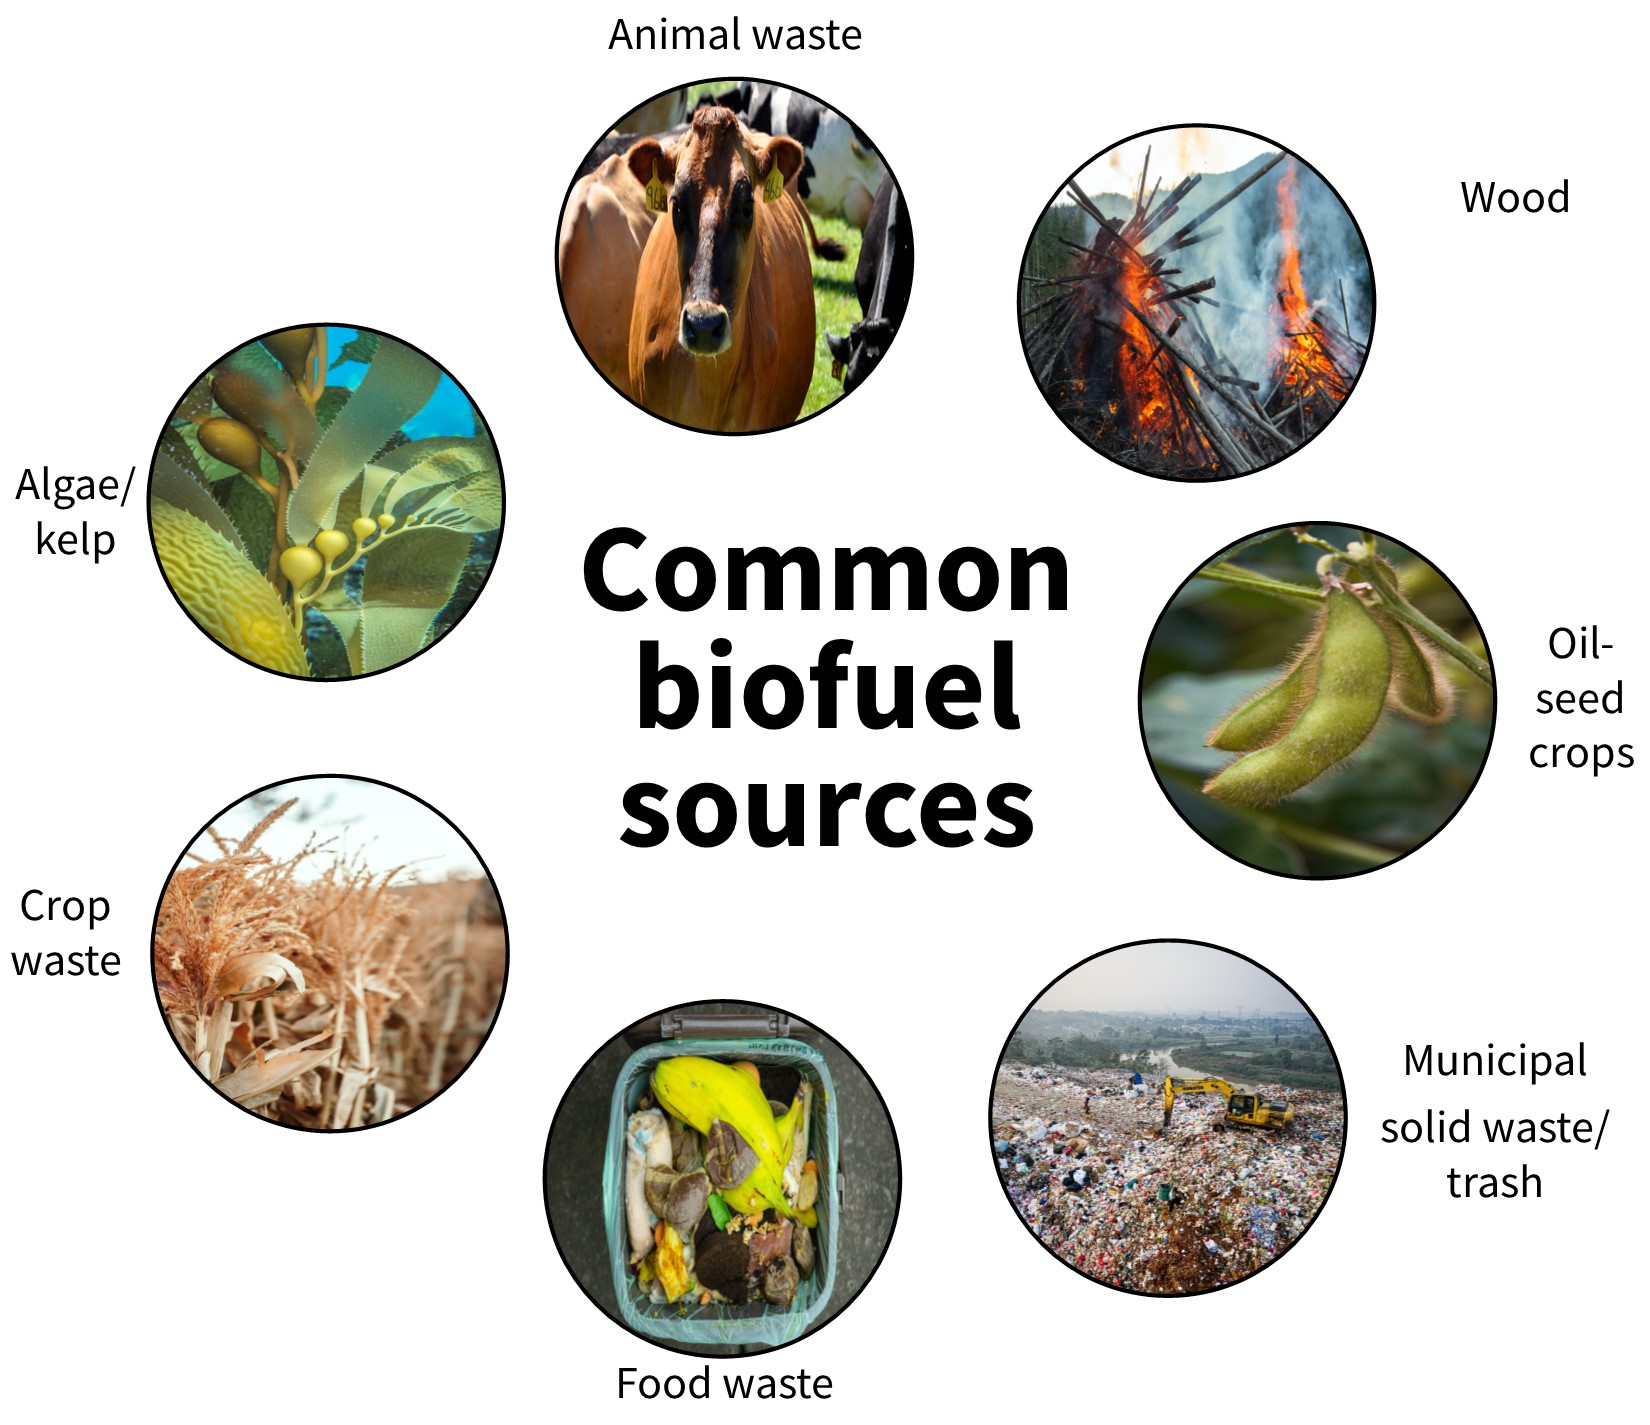 Seven images of biofuel sources in the northwest (animal waste, wood, oilseed crops, municipal solid waste/trash, food waste, crop waste, algae/kelp). Attribution: Clockwise starting with the image of a cow: NRCS Oregon, USDA, Cz Jen, Tom Fisk, Gareth Willey, Merrit Thomas, National Park Service